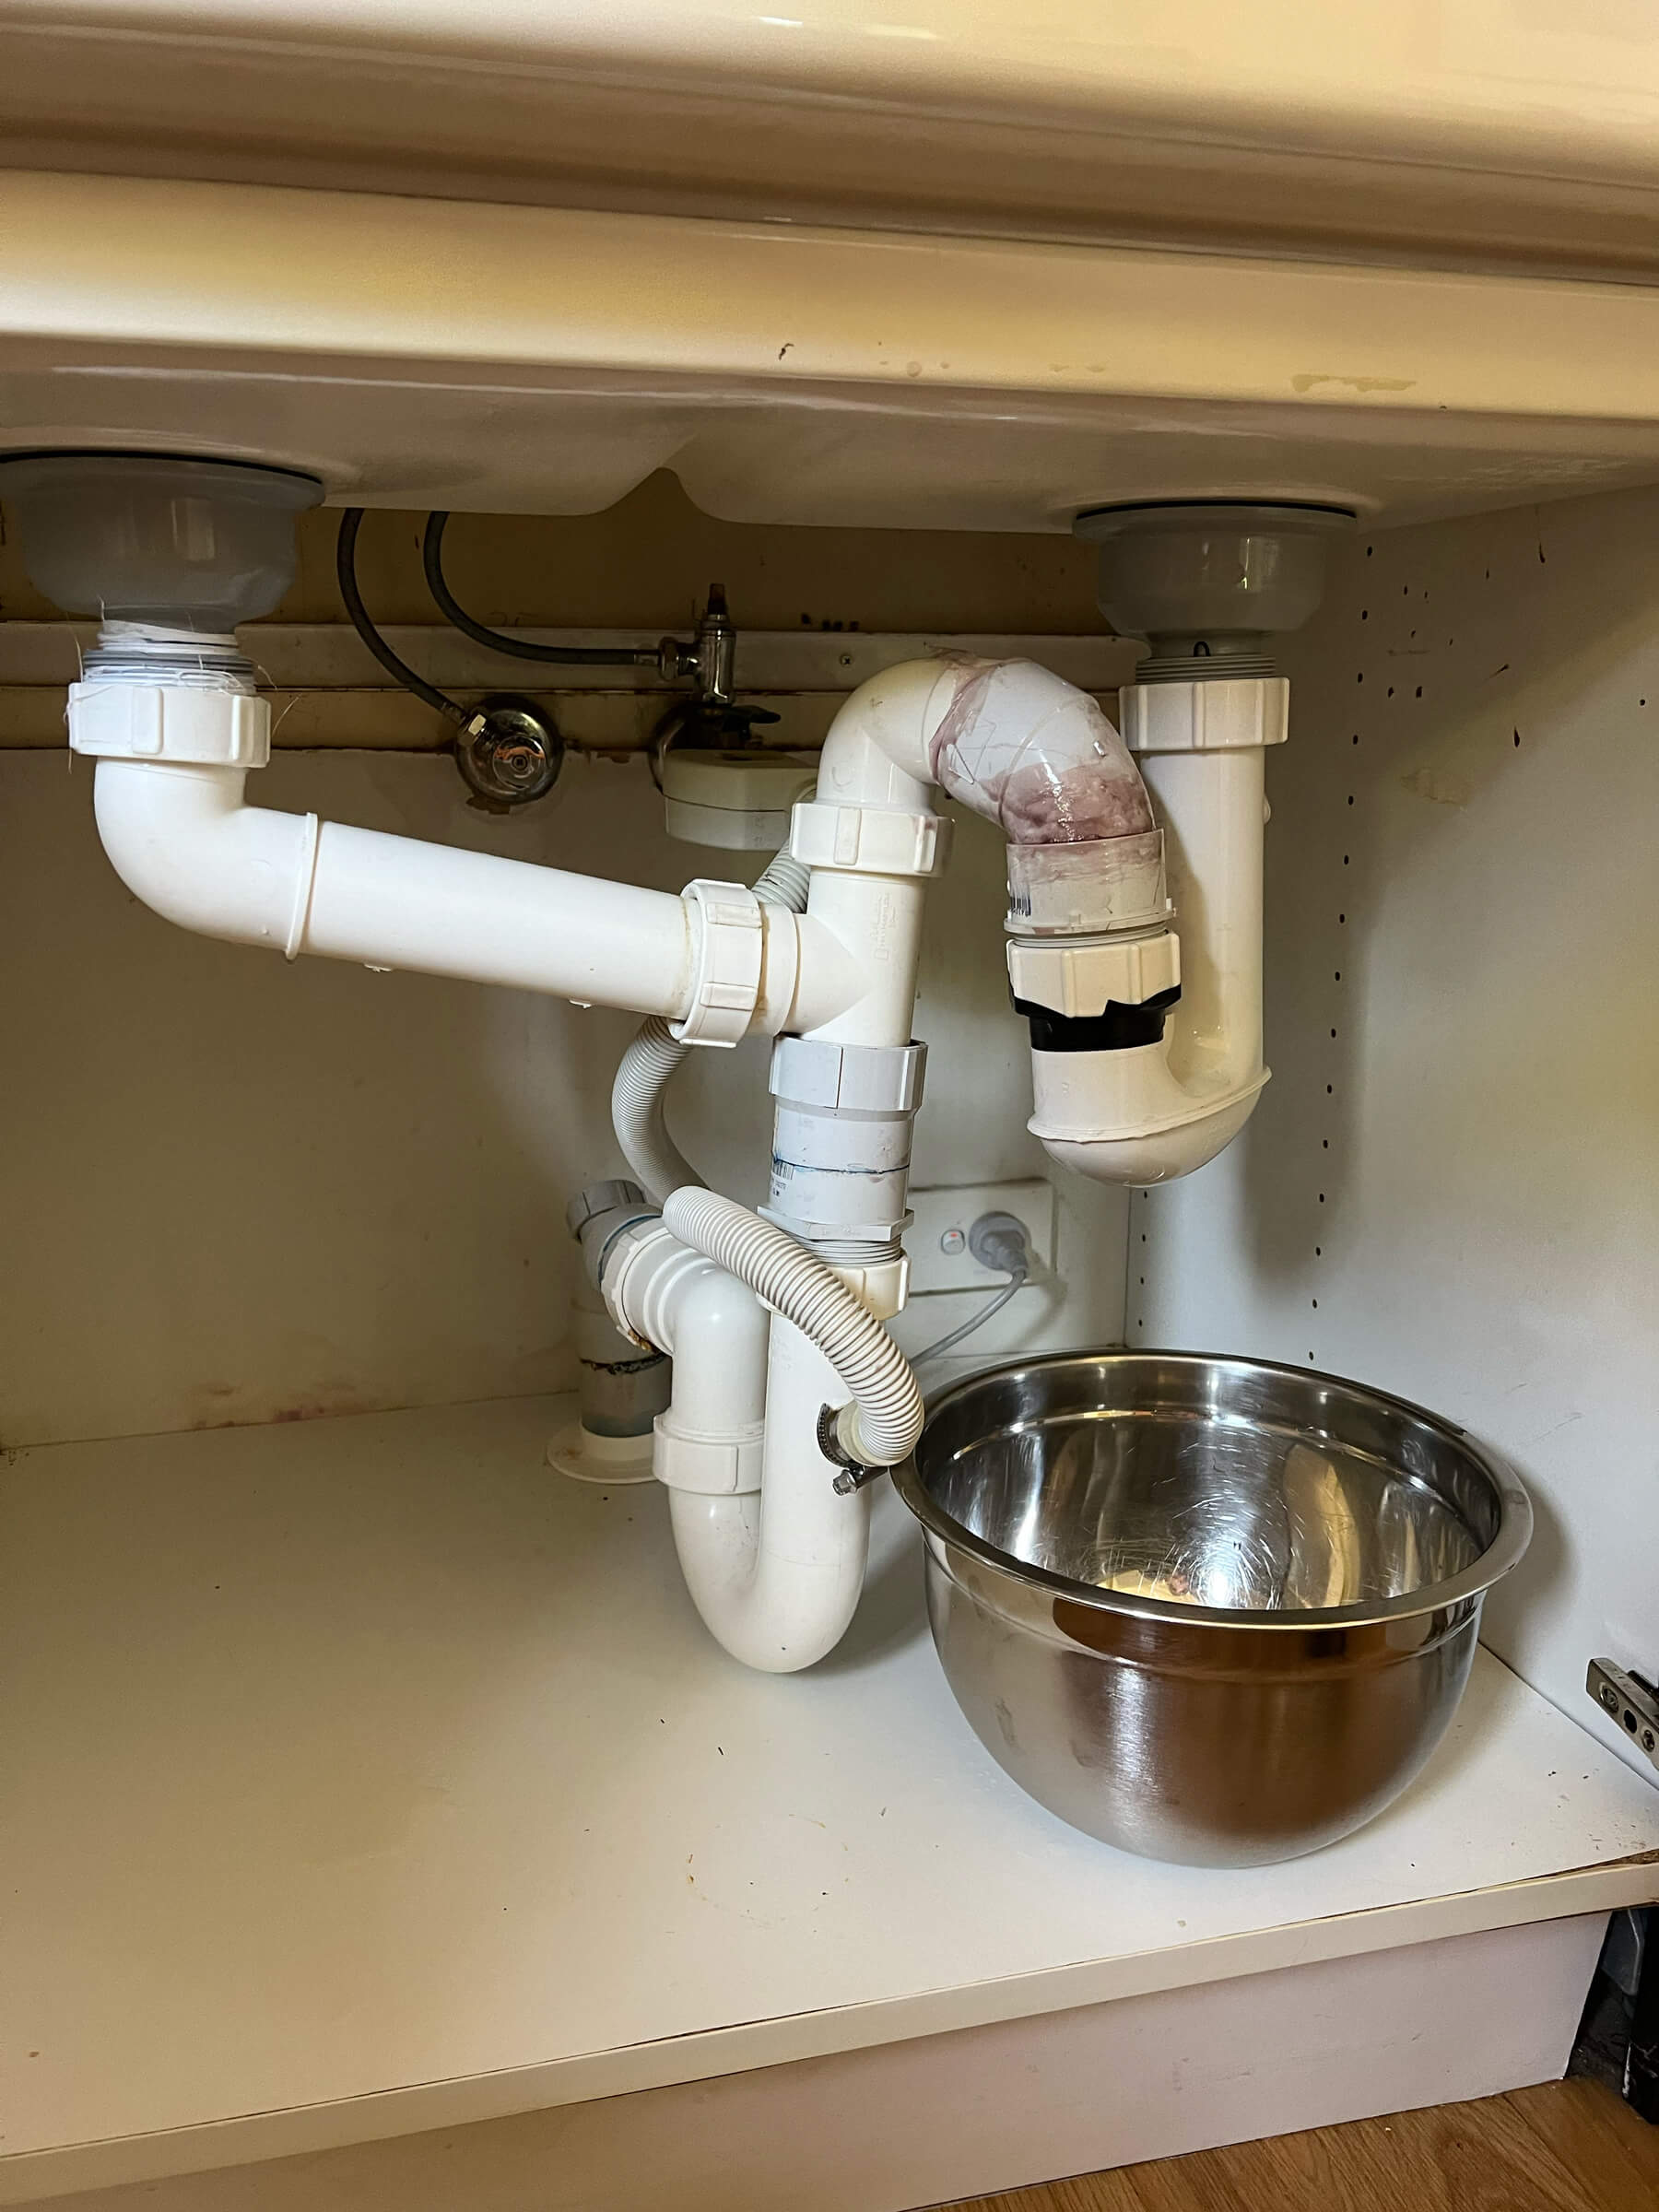 Incorrect plumbing set-up under a sink